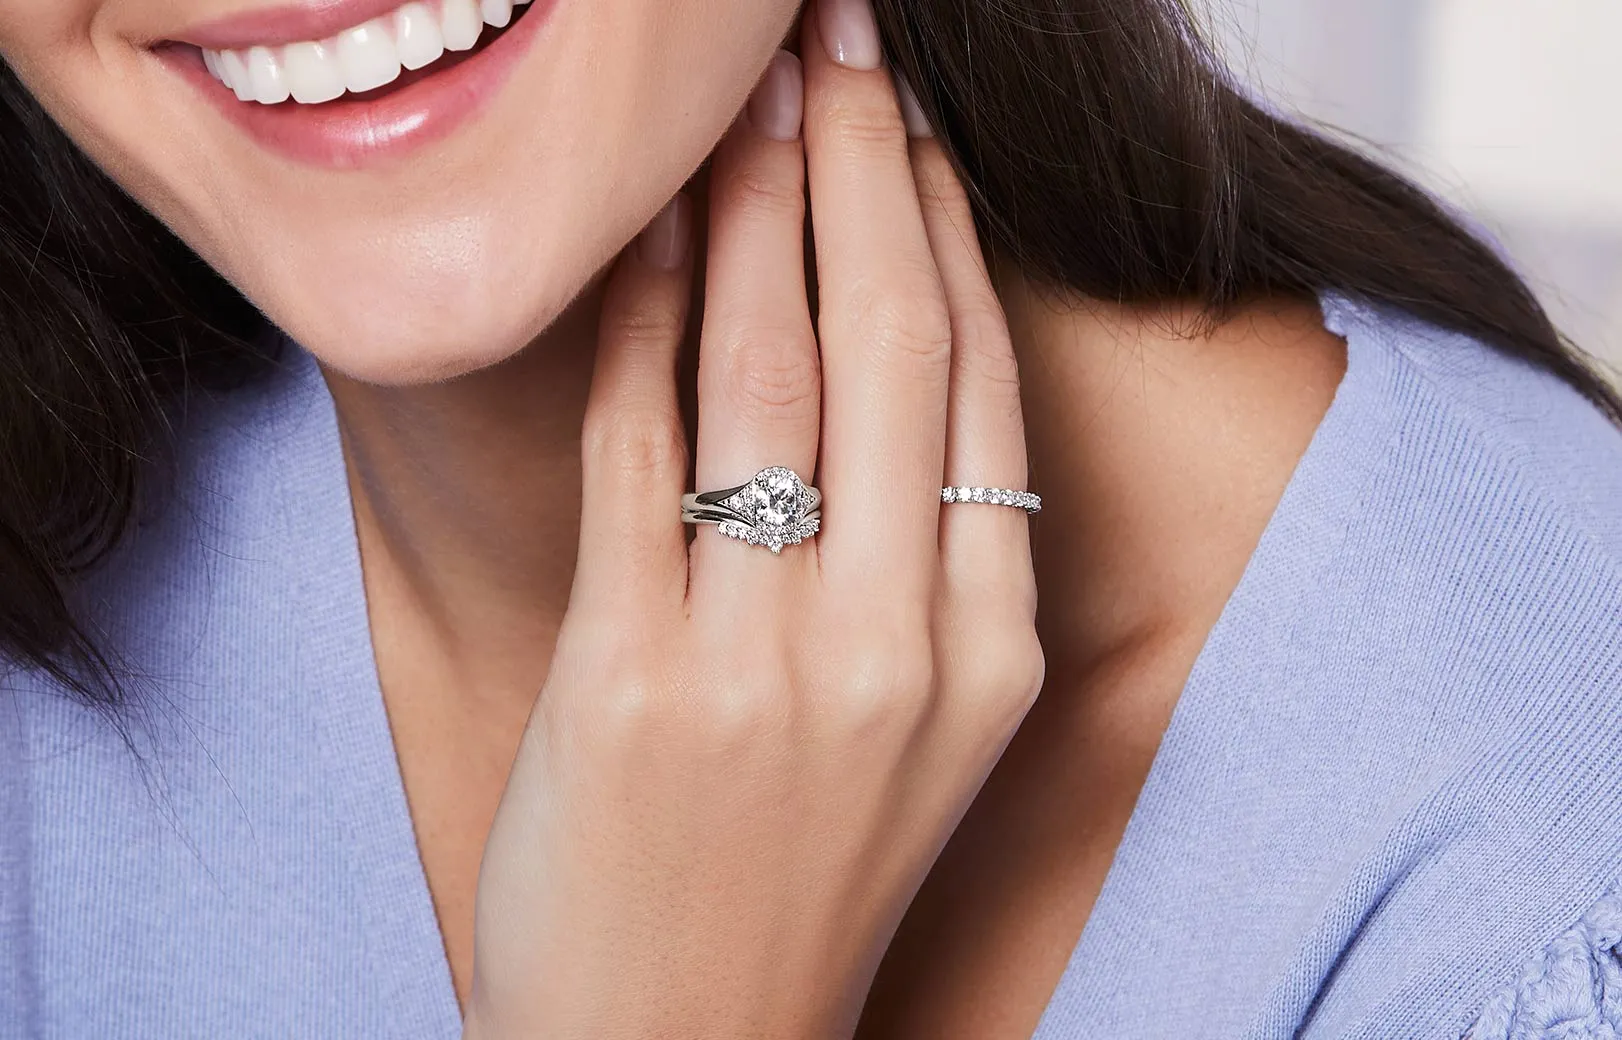 Why Diamond Size Matters: The Impact of Carat Weight on Beauty and Value